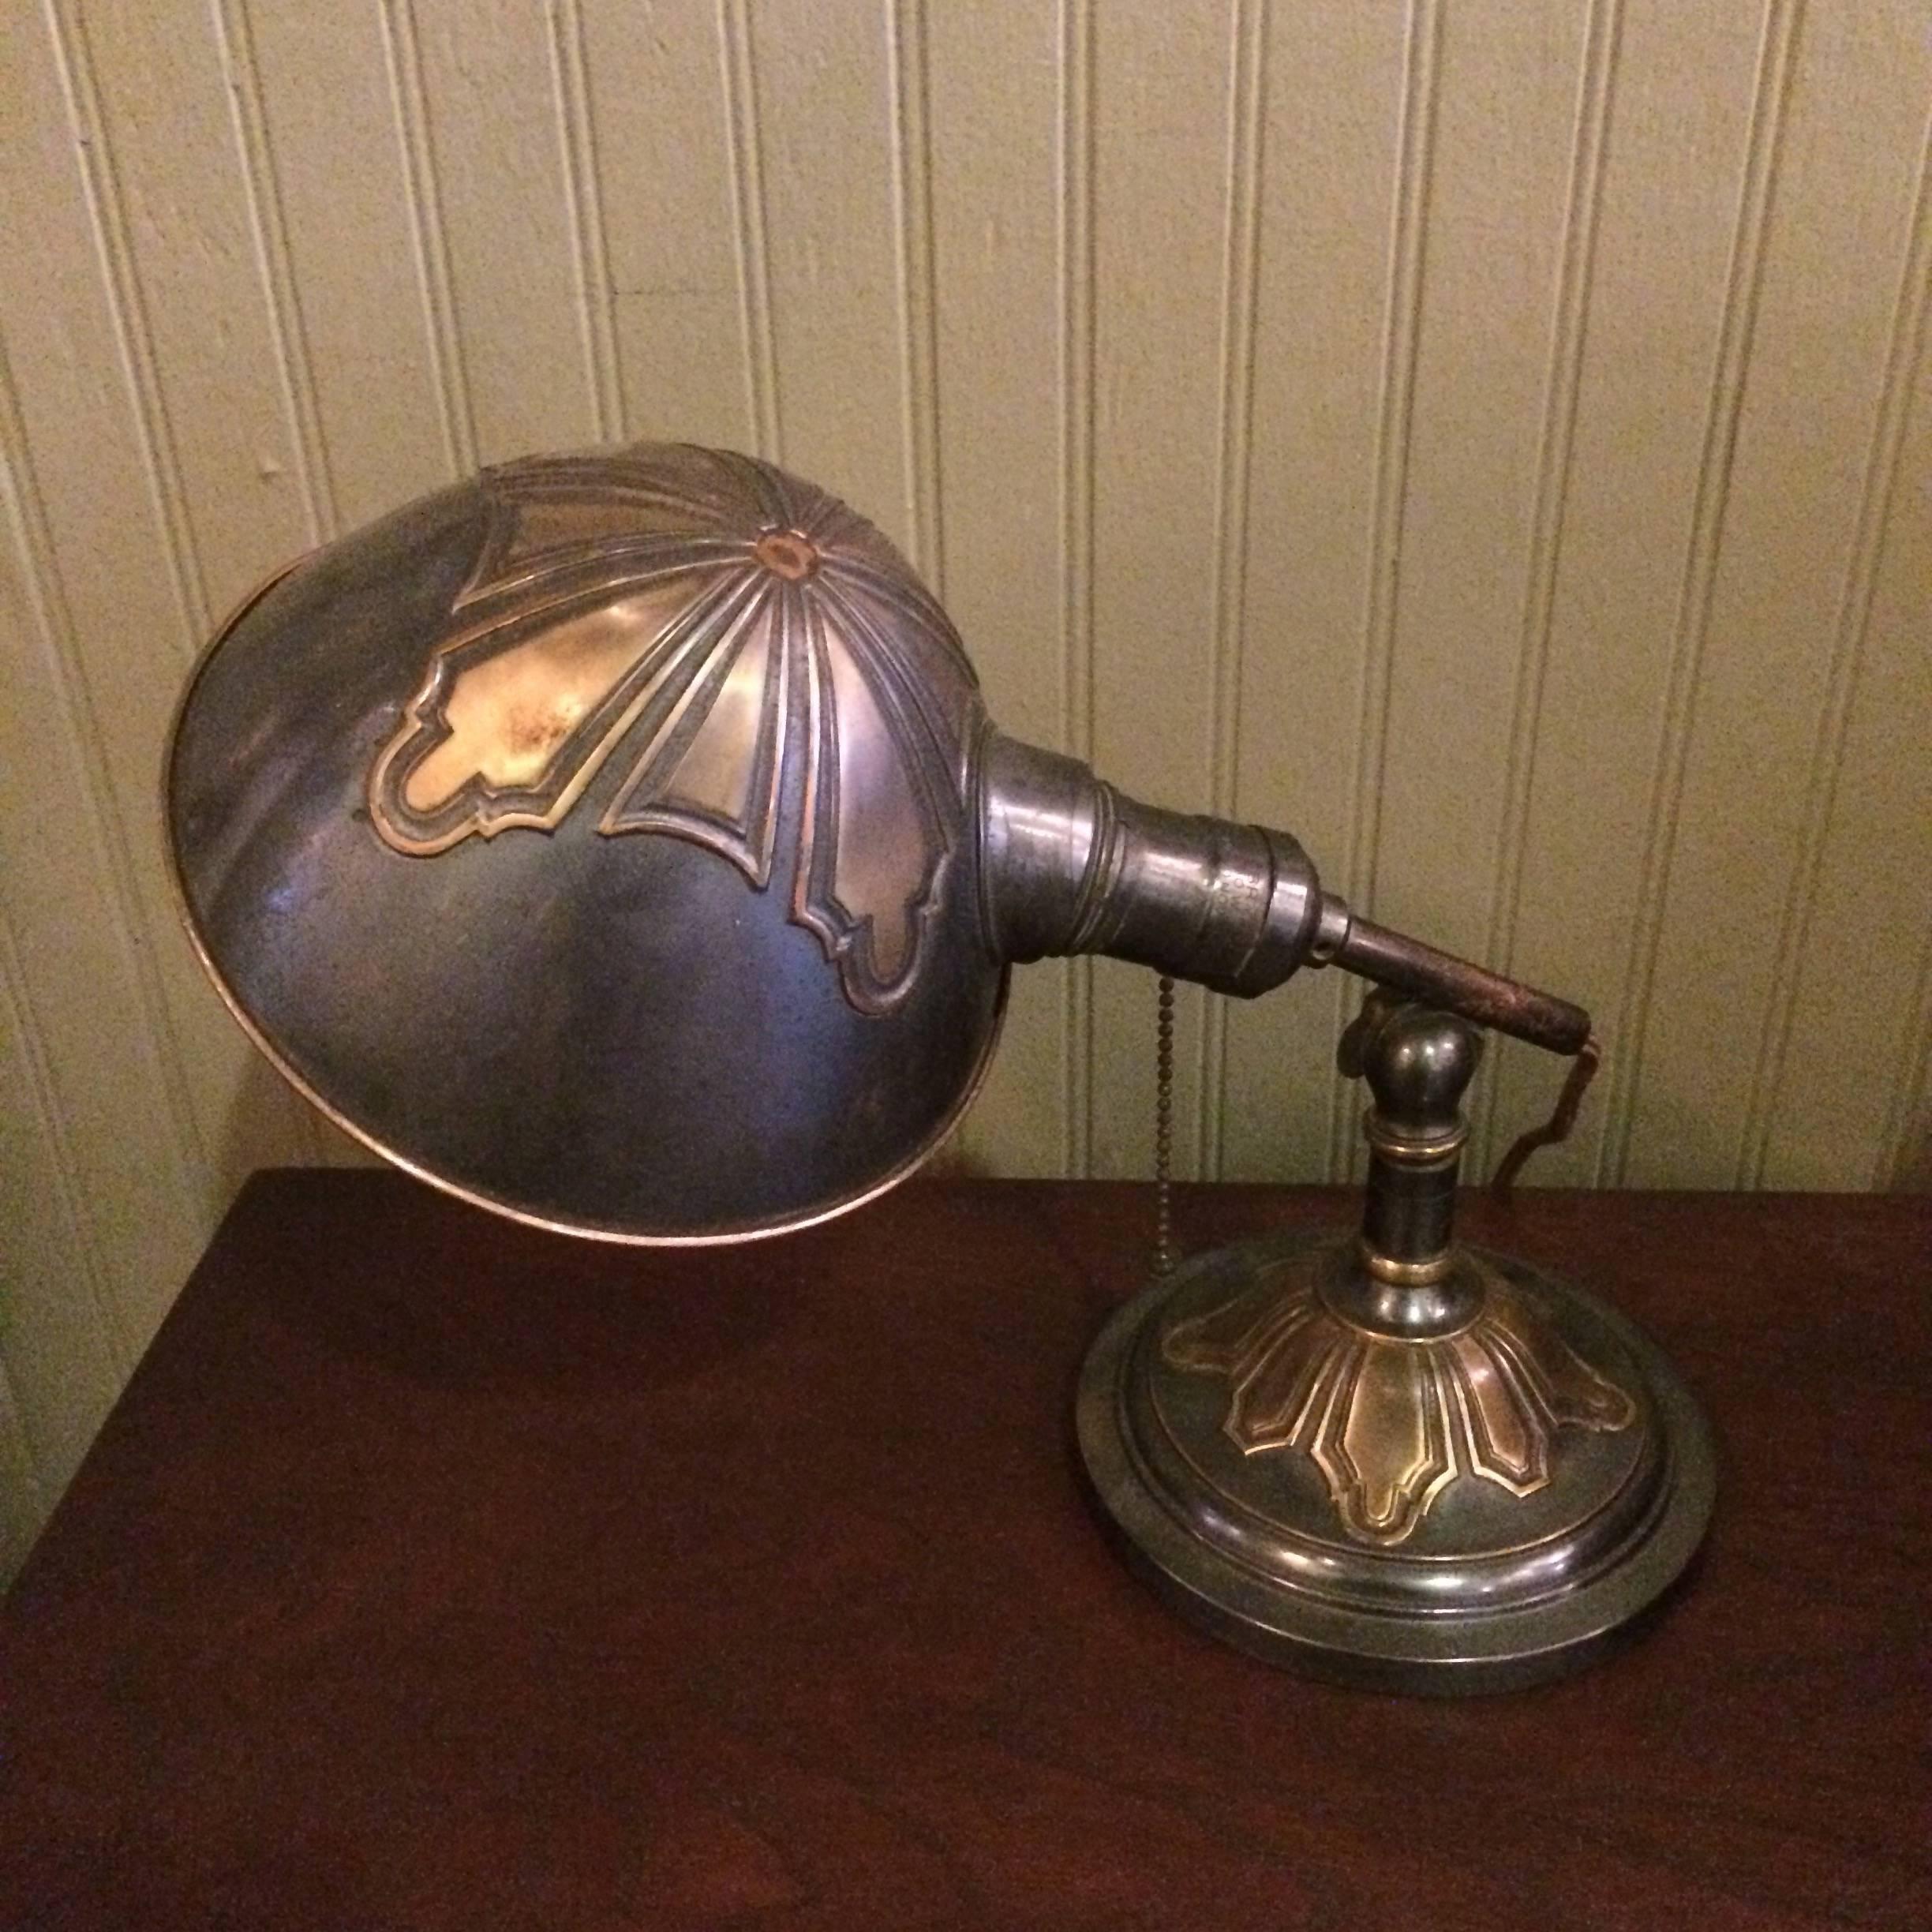 Arts & Crafts, articulating, copper, desk lamp with decoratively embossed base and shade with pull chain operation is newly wired with cloth cord.